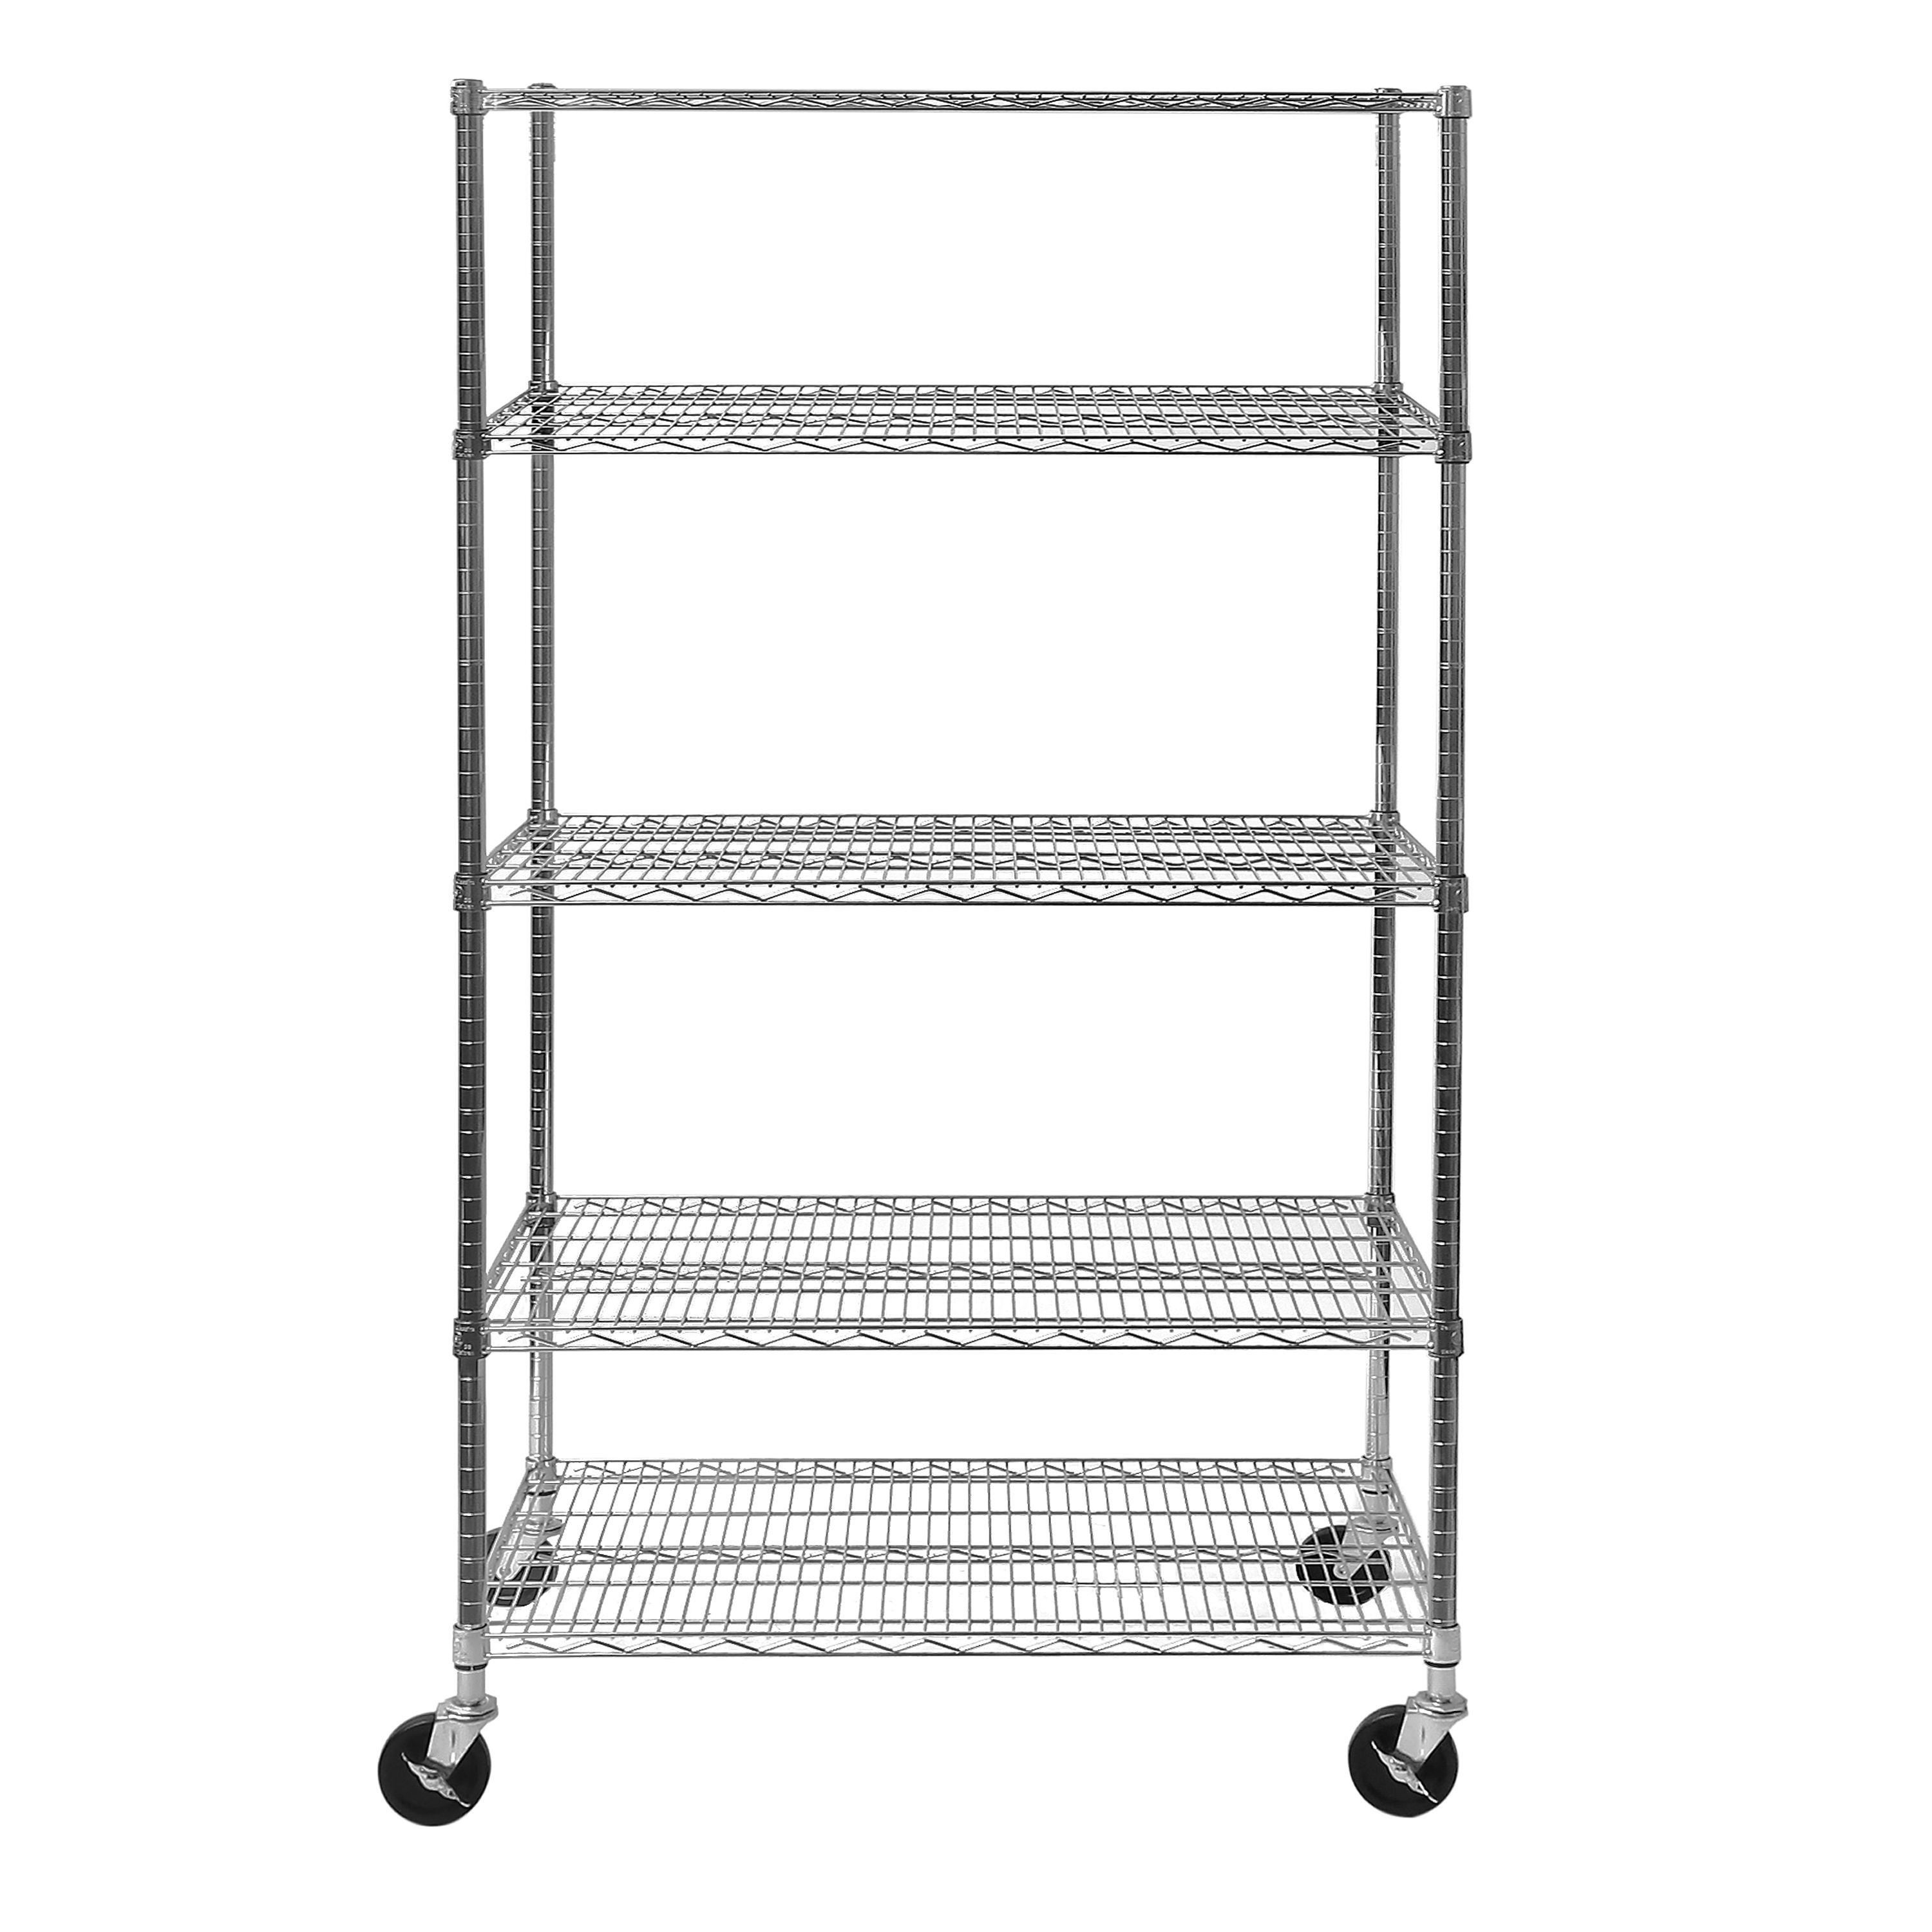  Seville Classics Commerical Grade NSF-Certified Bin Rack Storage  Steel Wire Shelving System - 22 Bins - Gray : Home & Kitchen